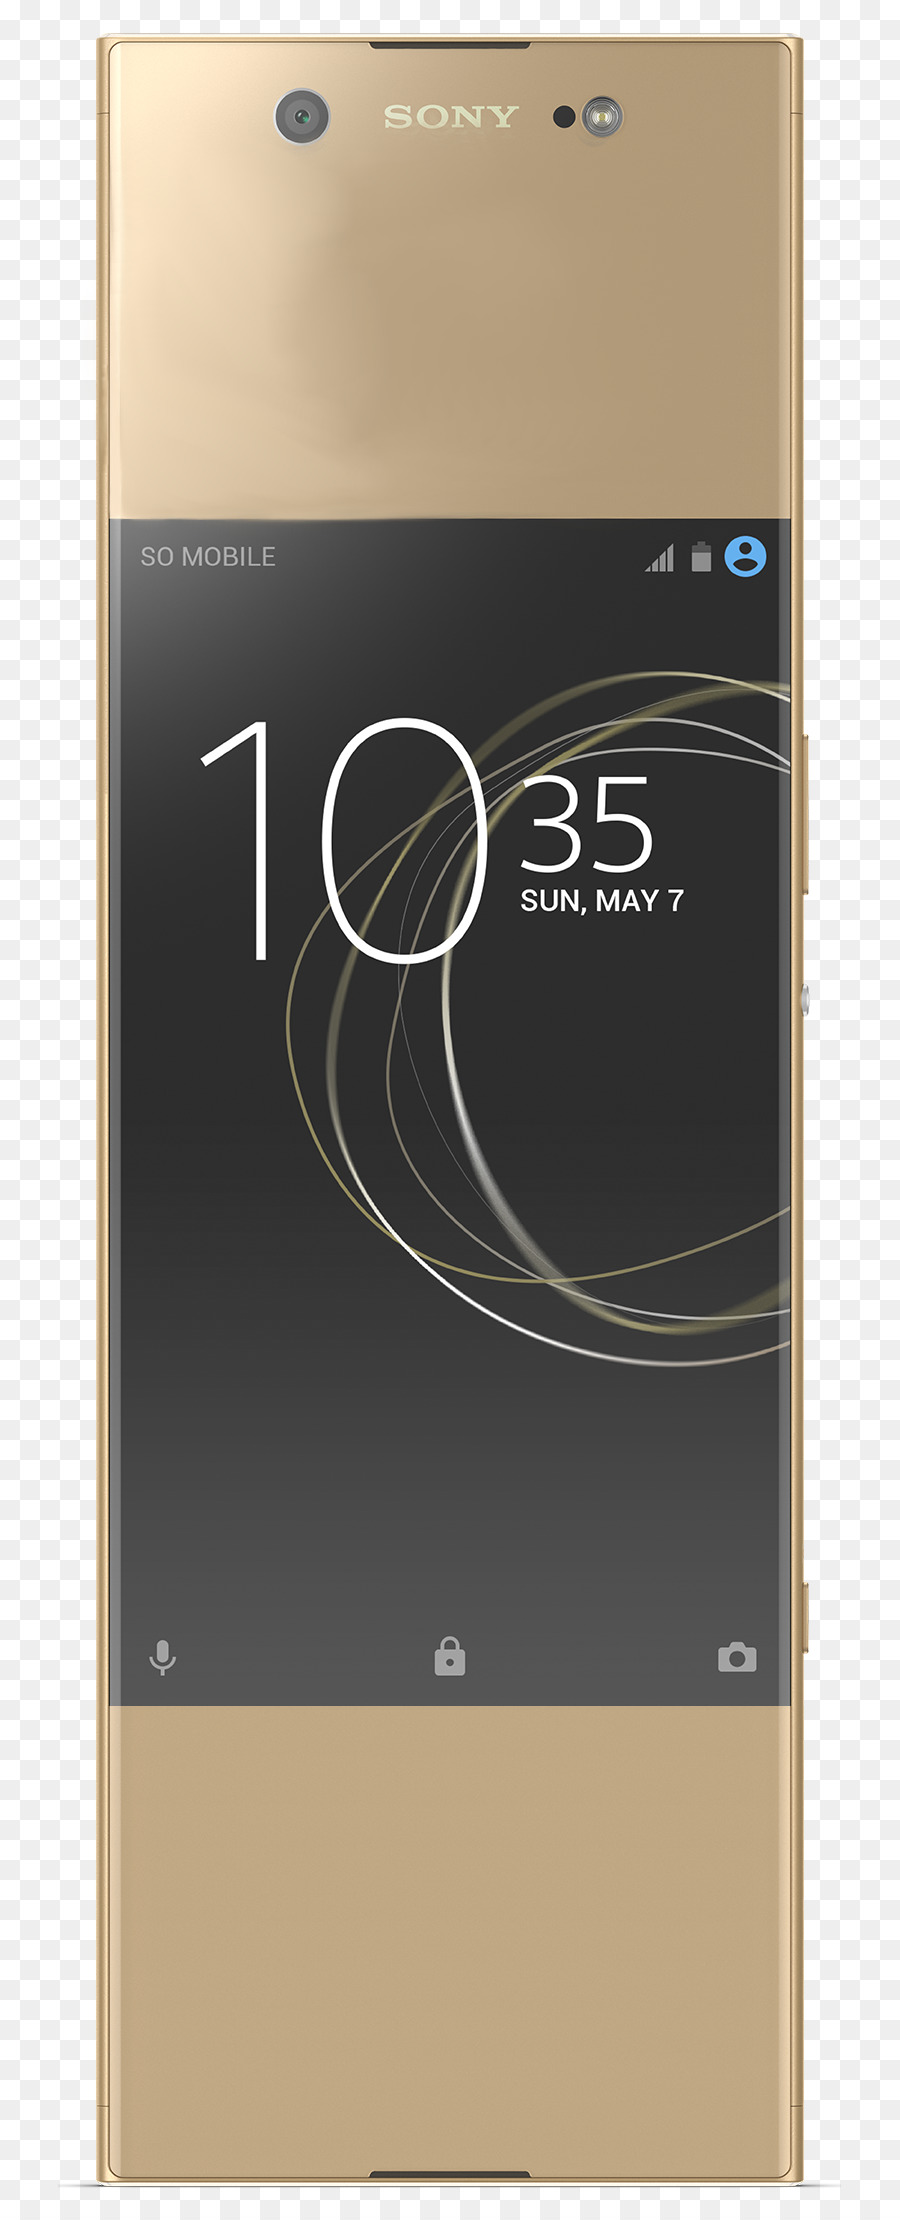 Сони Xperia Xa1，Сони Xperia Xa1 ультра PNG